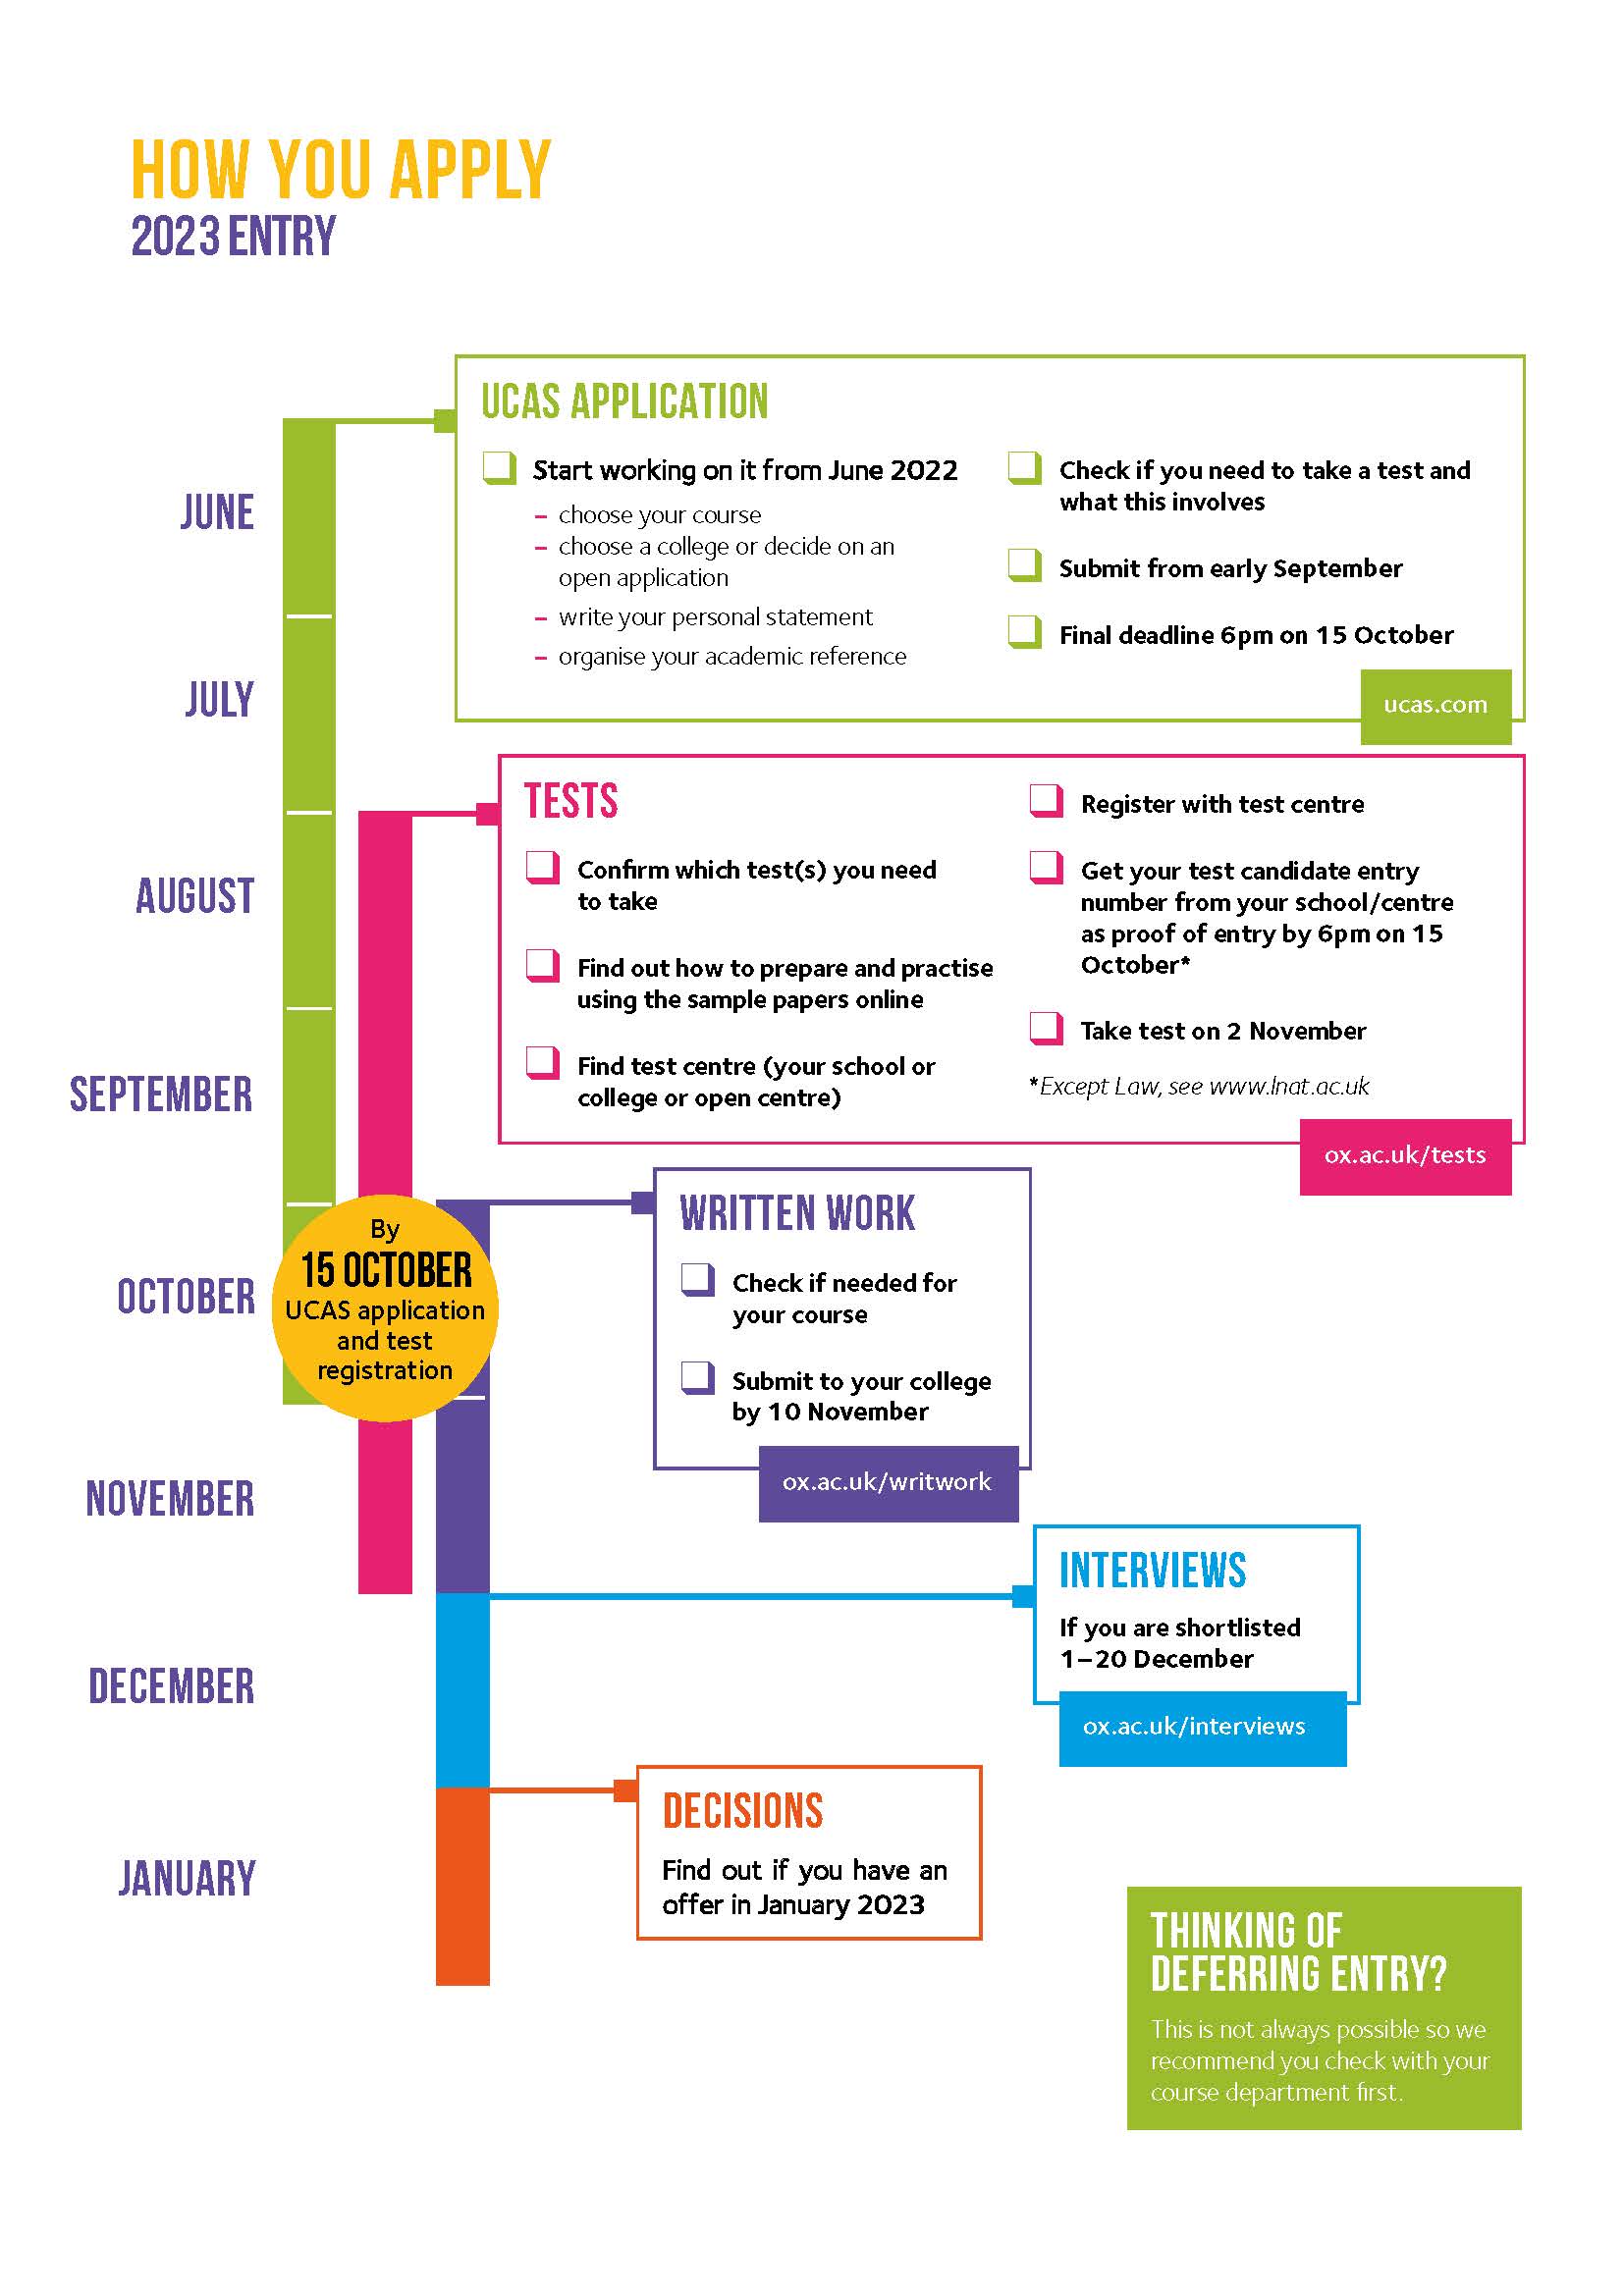 Admissions timeline showing key dates from June to January. PDF version available below, and text in description. 